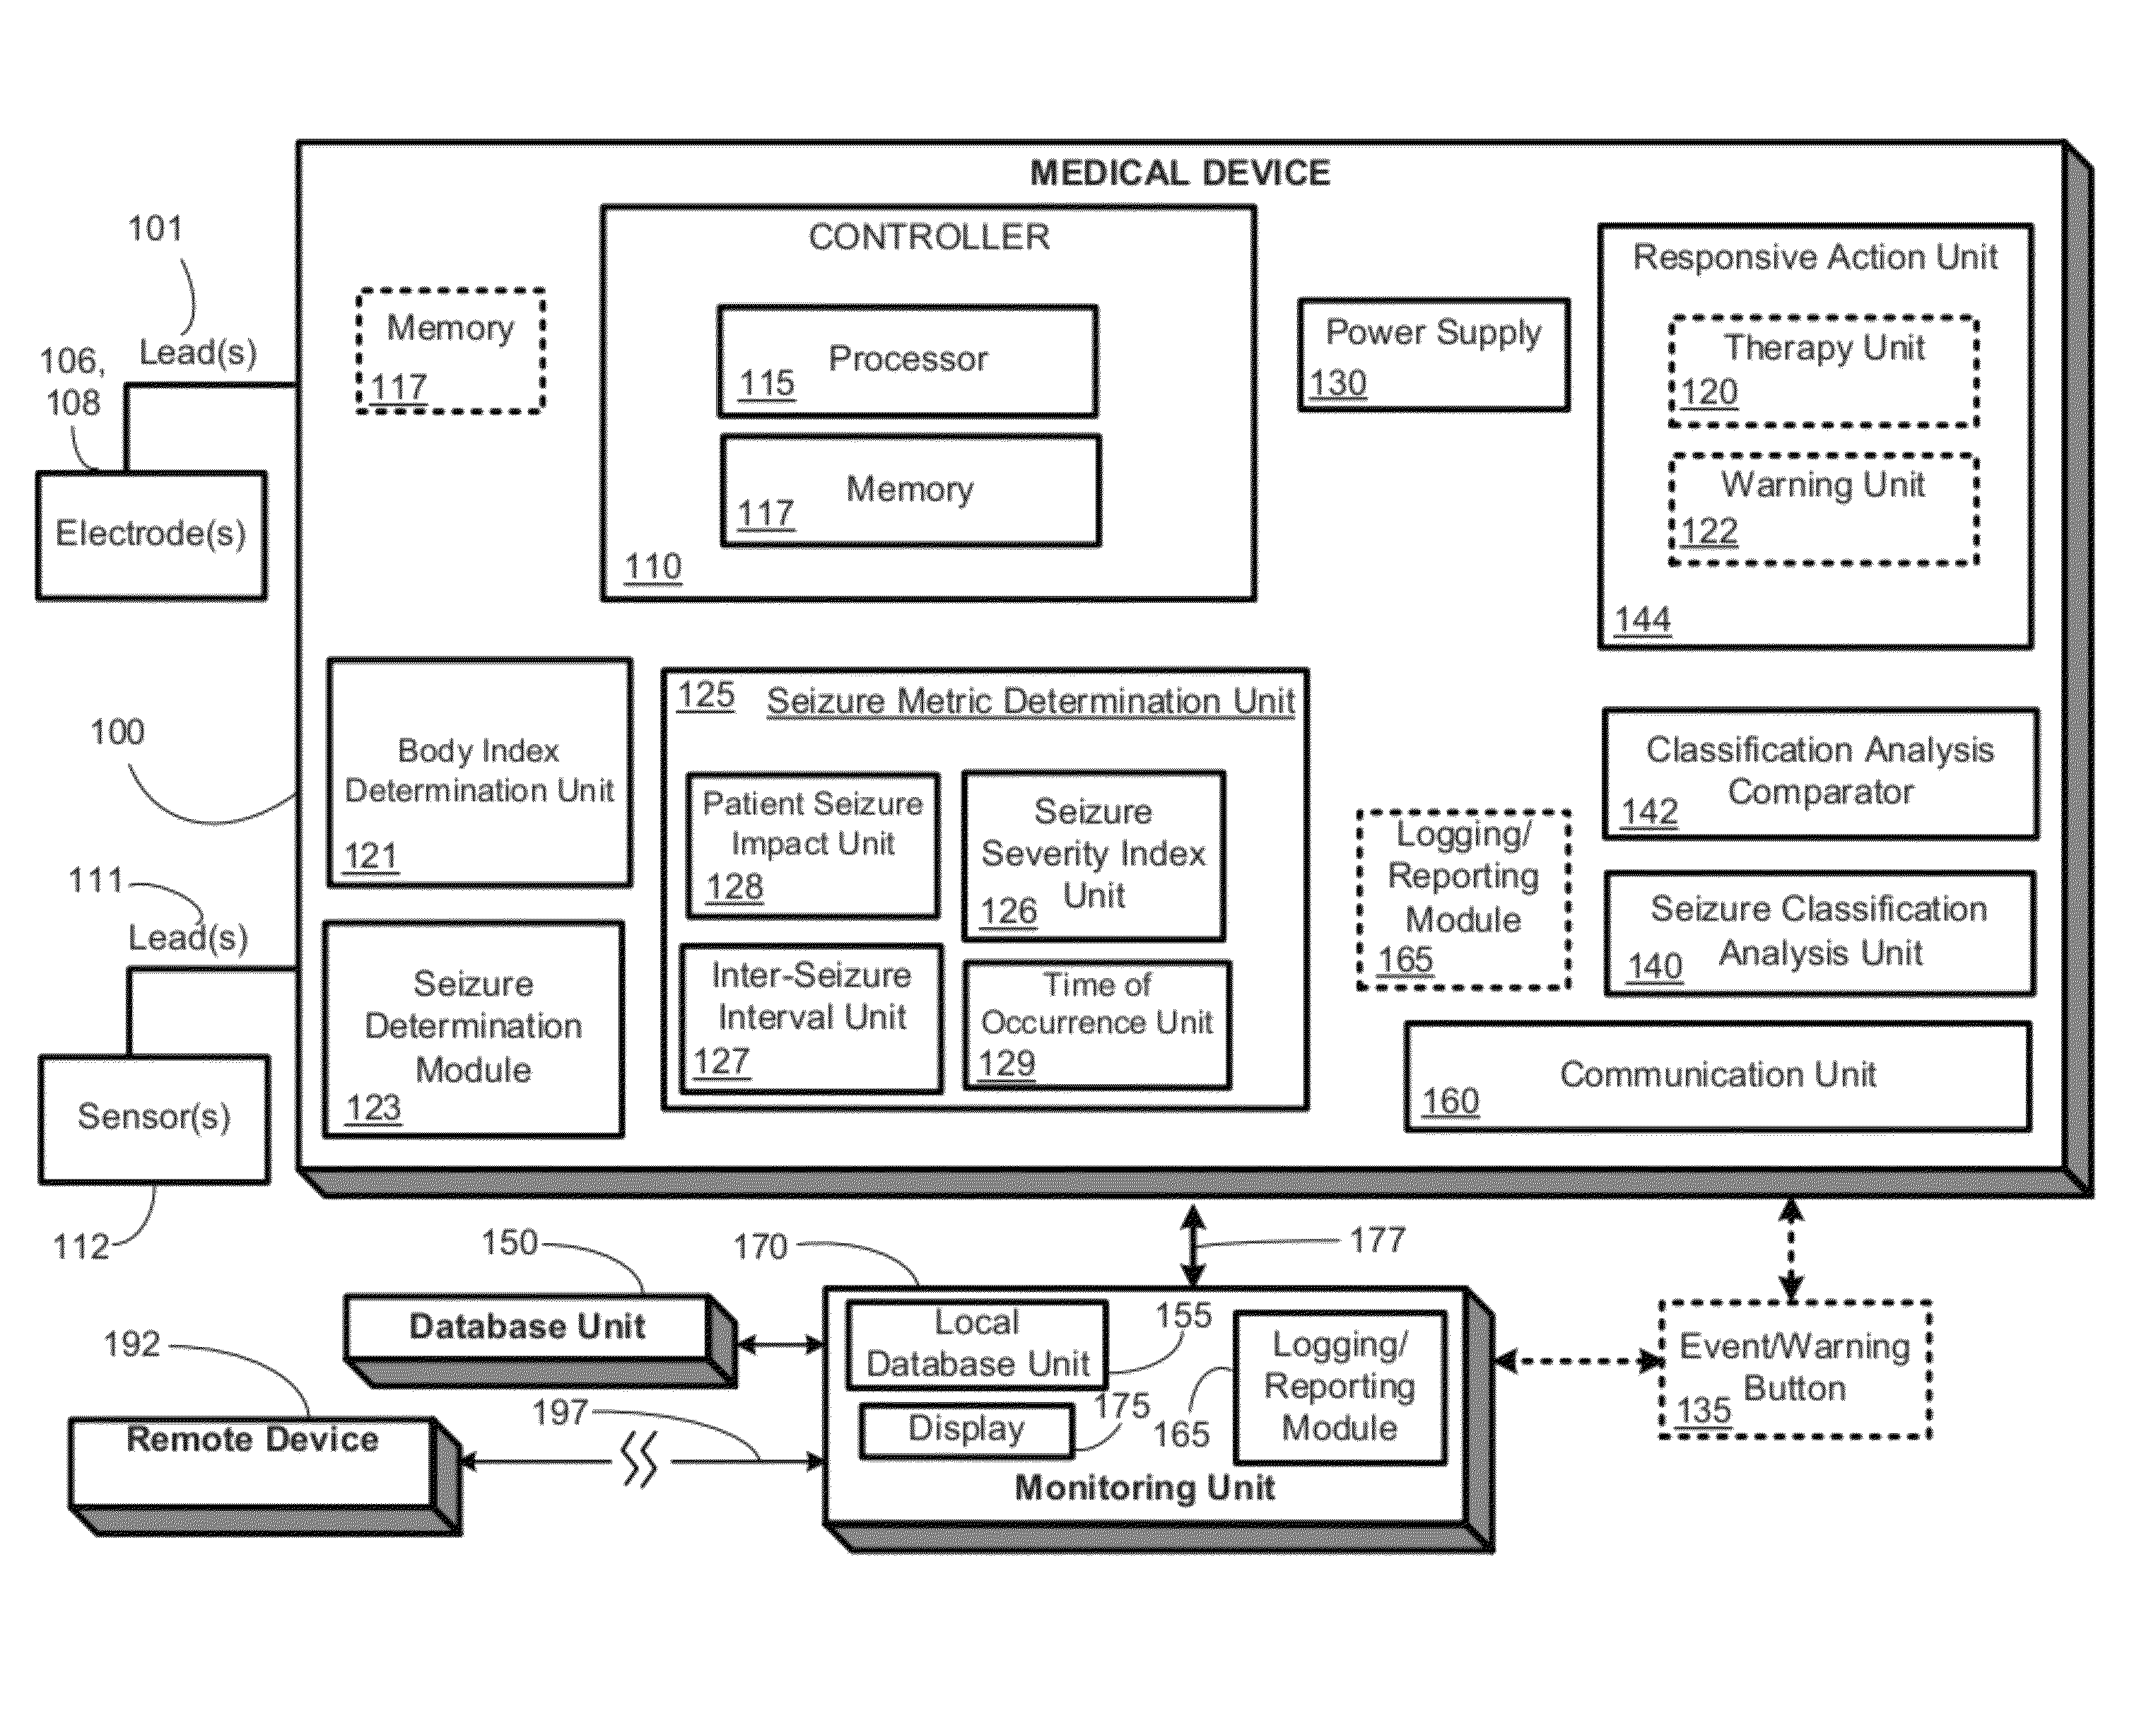 Detecting, assessing and managing epilepsy using a multi-variate, metric-based classification analysis